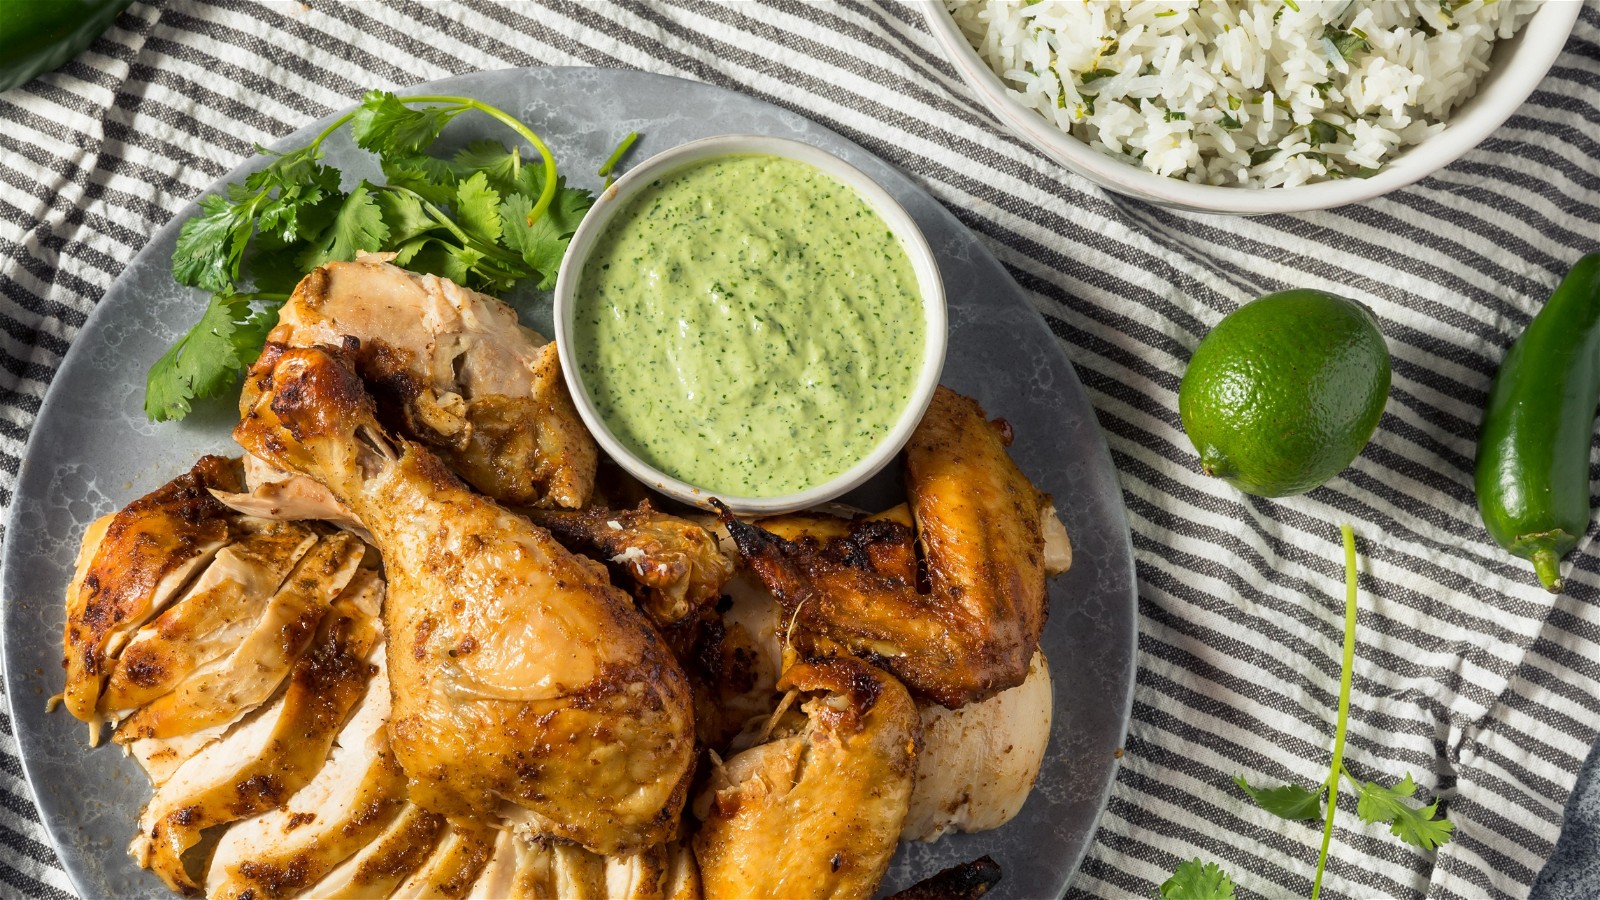 Image of Aji True Lime and Cilantro Grilled Chicken